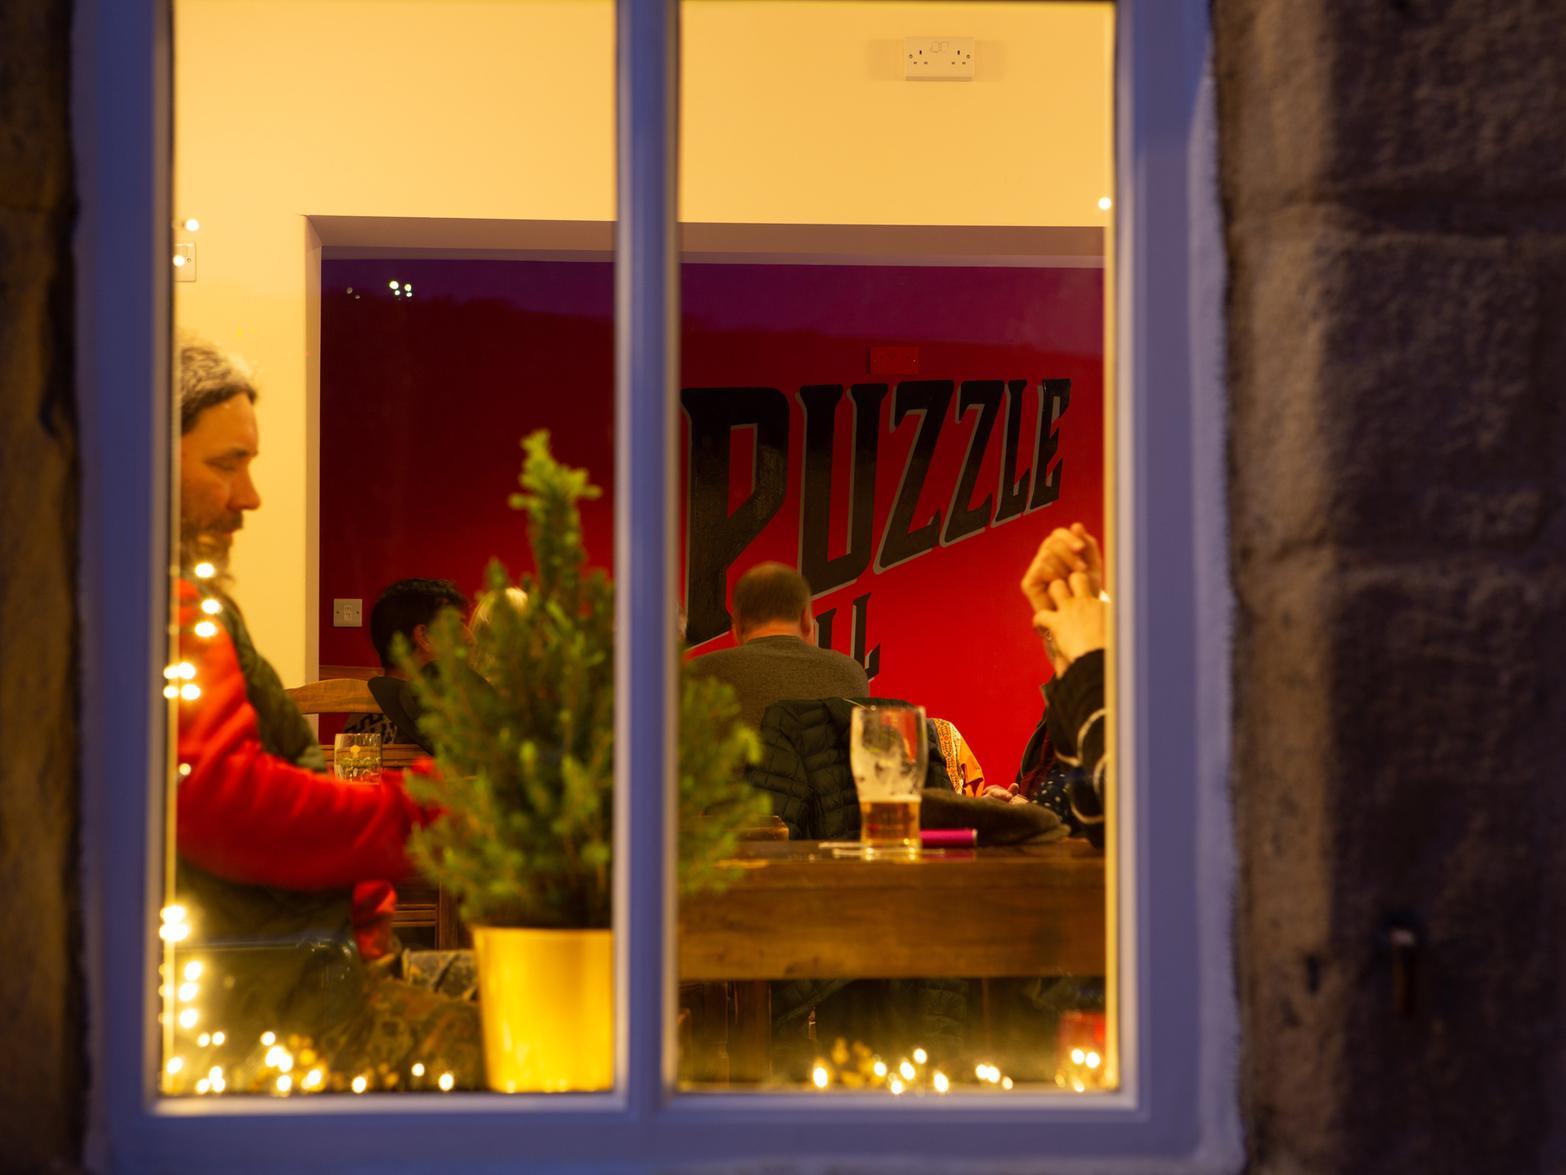 Famed for its music festivals, warm welcome and quirky aesthetic, the Puzzle was saved by a successful community share offer, social investment funding and a dedicated team of volunteers.